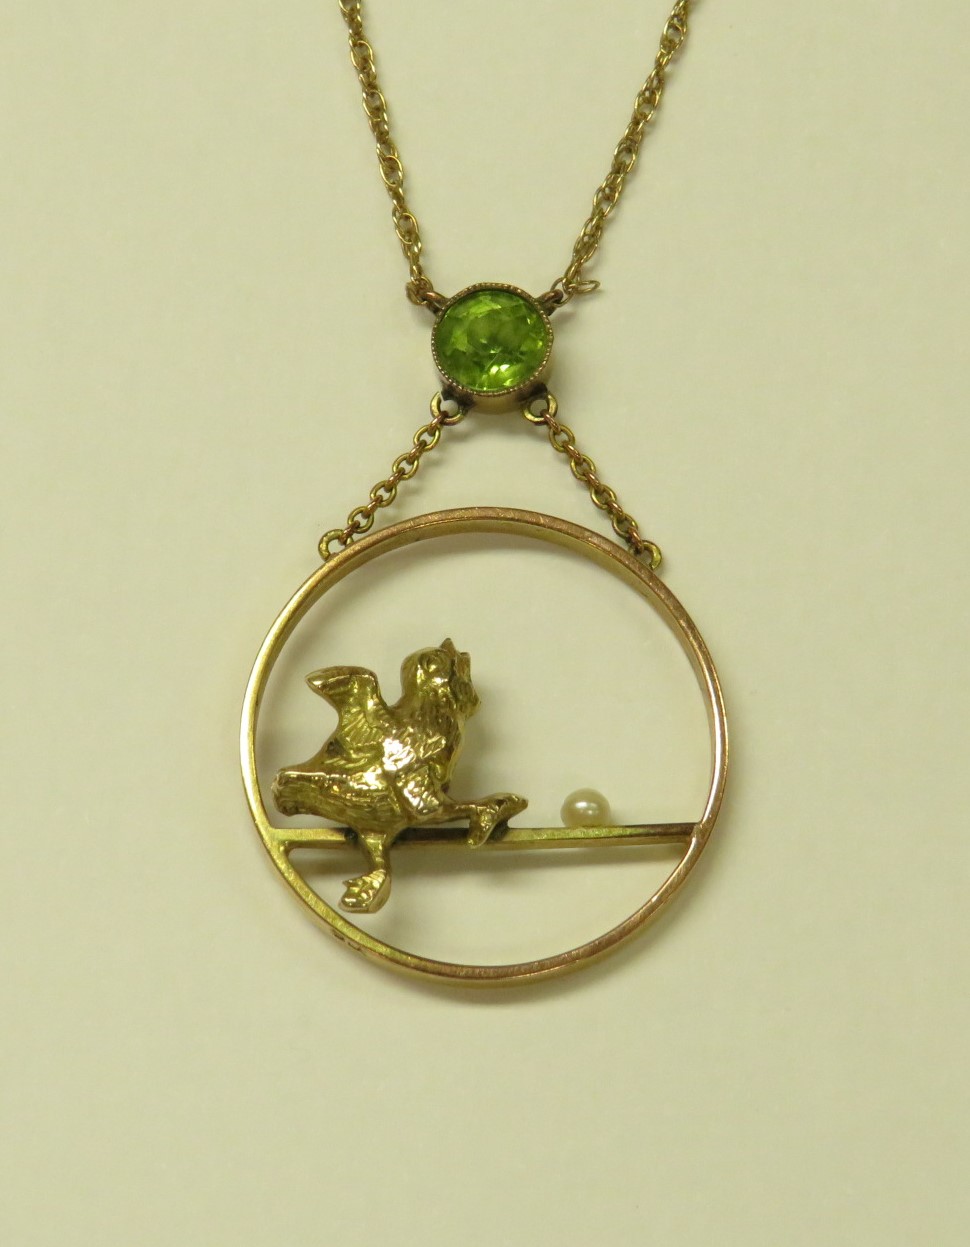 YELLOW METAL HOOP PENDANT SUSPENDED FROM A SET GREEN STONE (PERHAPS PERIDOT), MODELLED WITH A